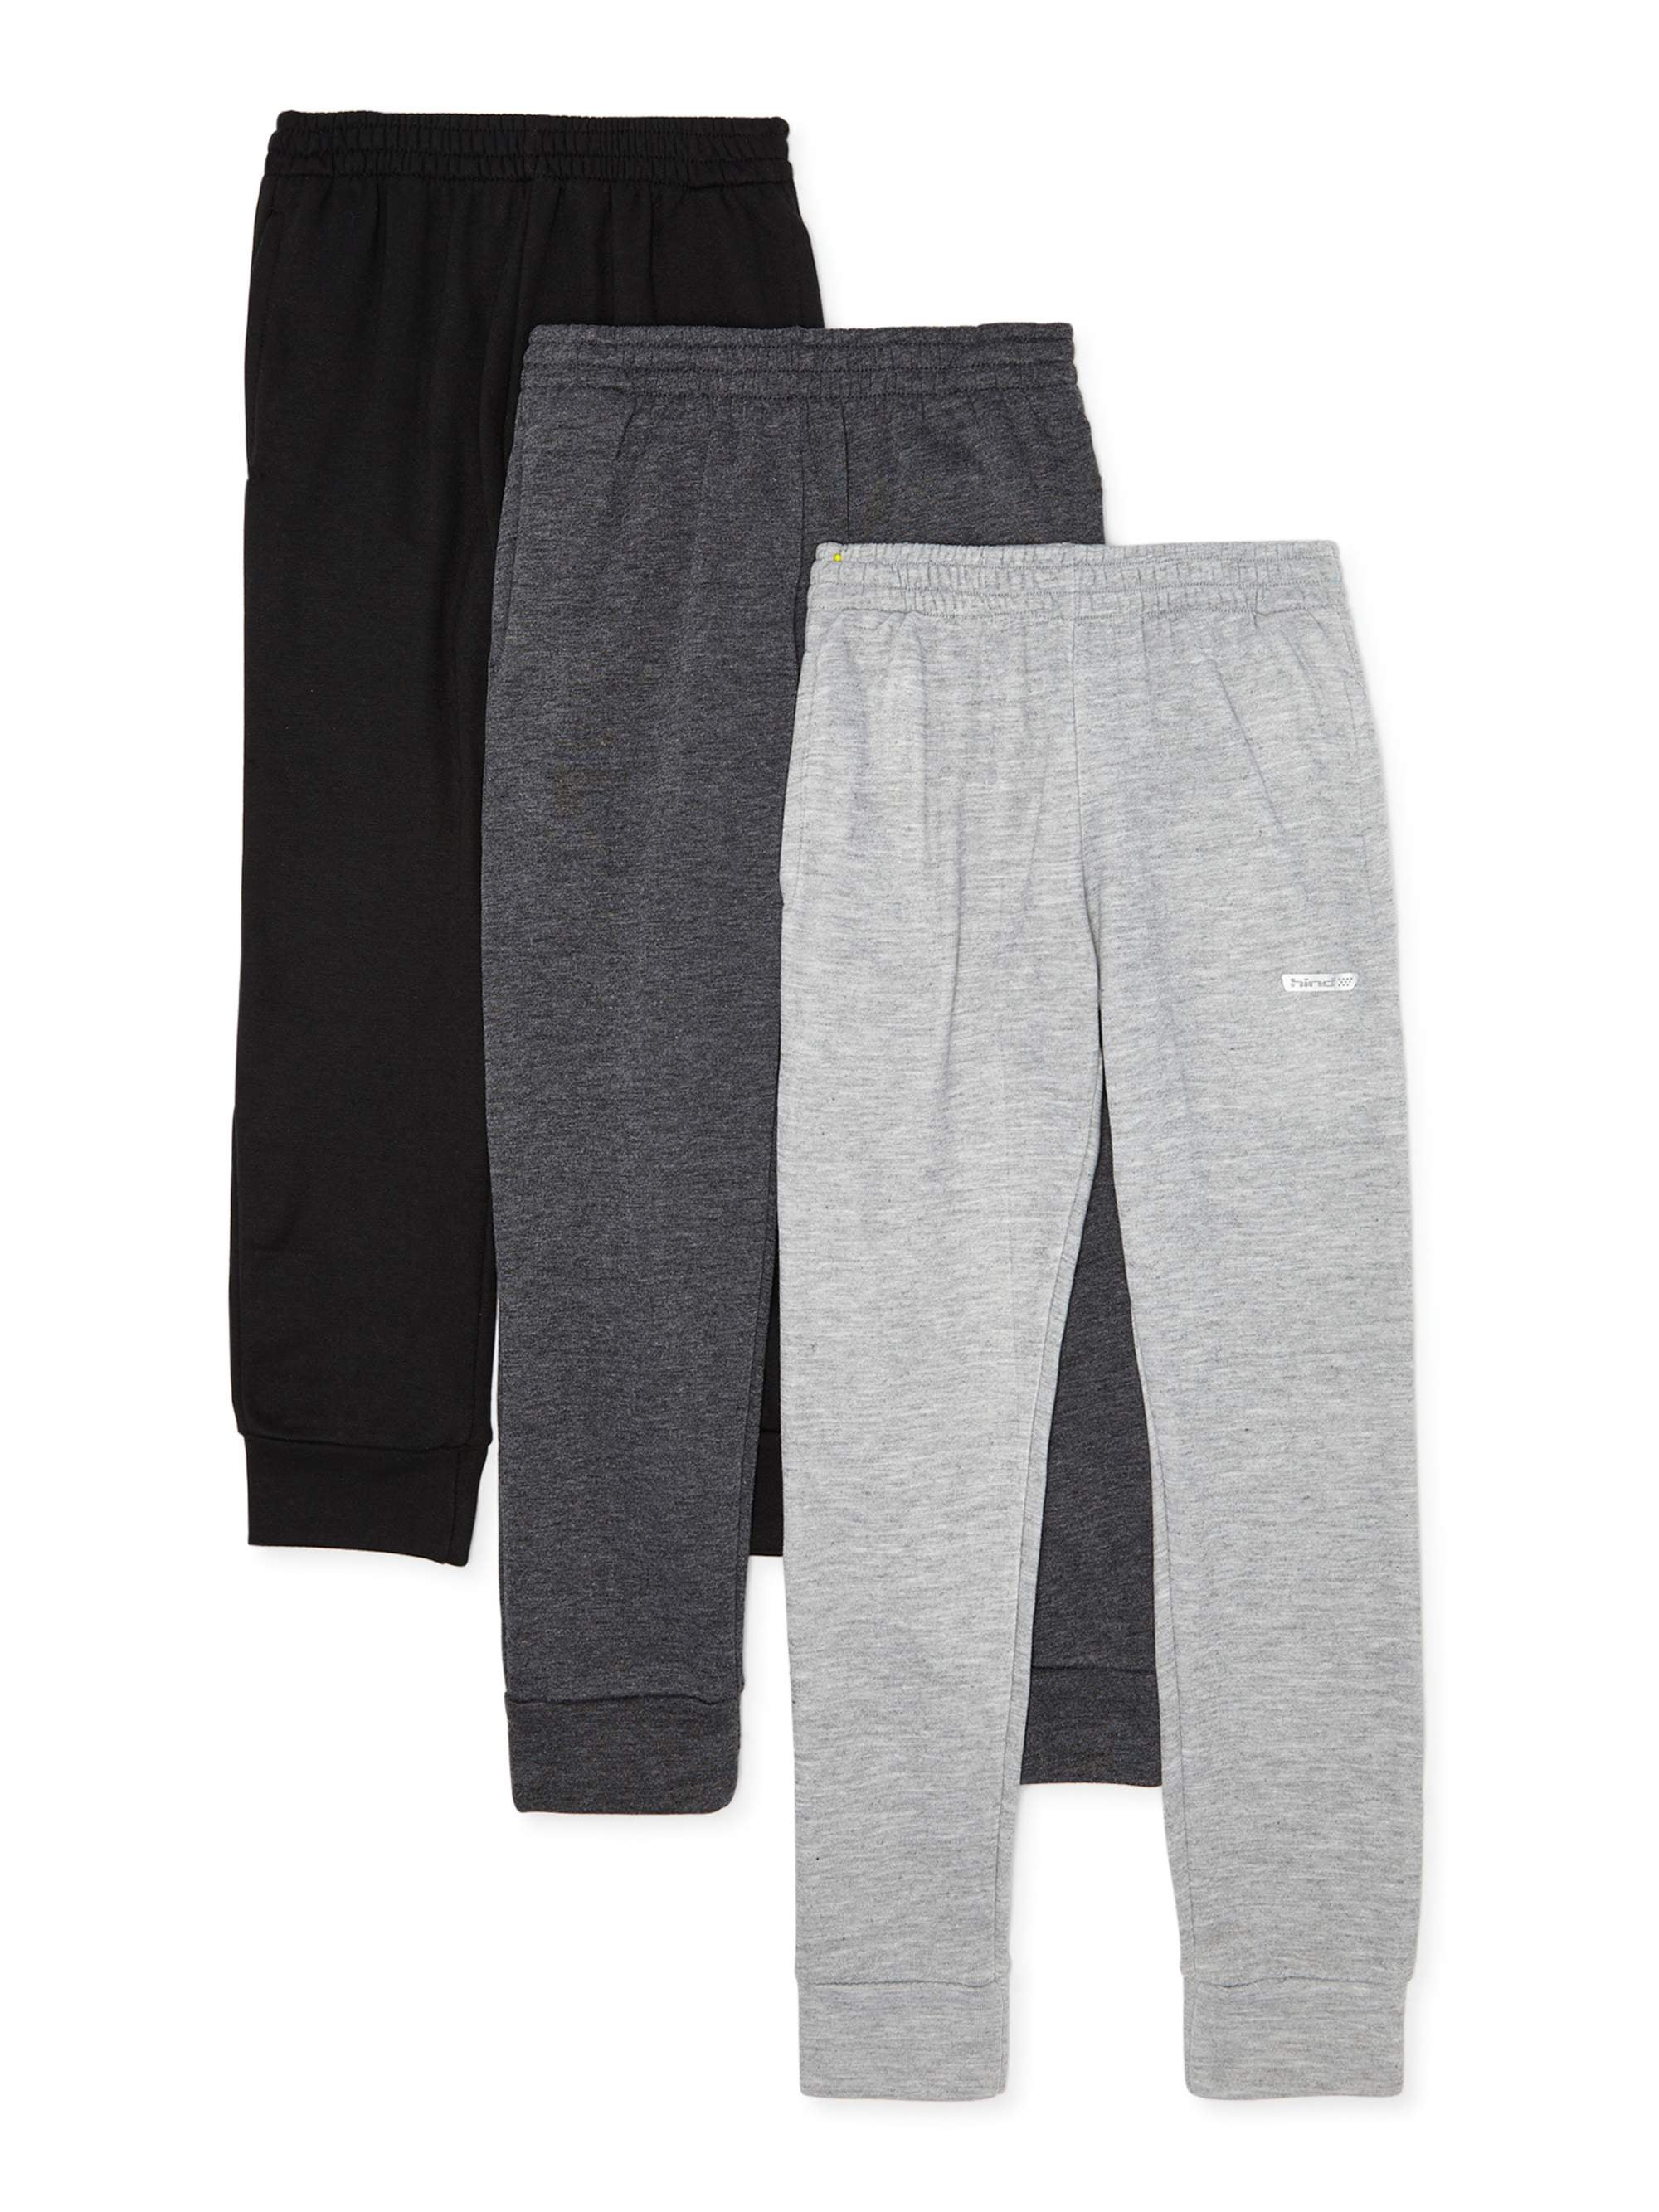 Hind Boys 3-Pack Fleece Jogger Sweatpants for Athletic & Casual Wear 